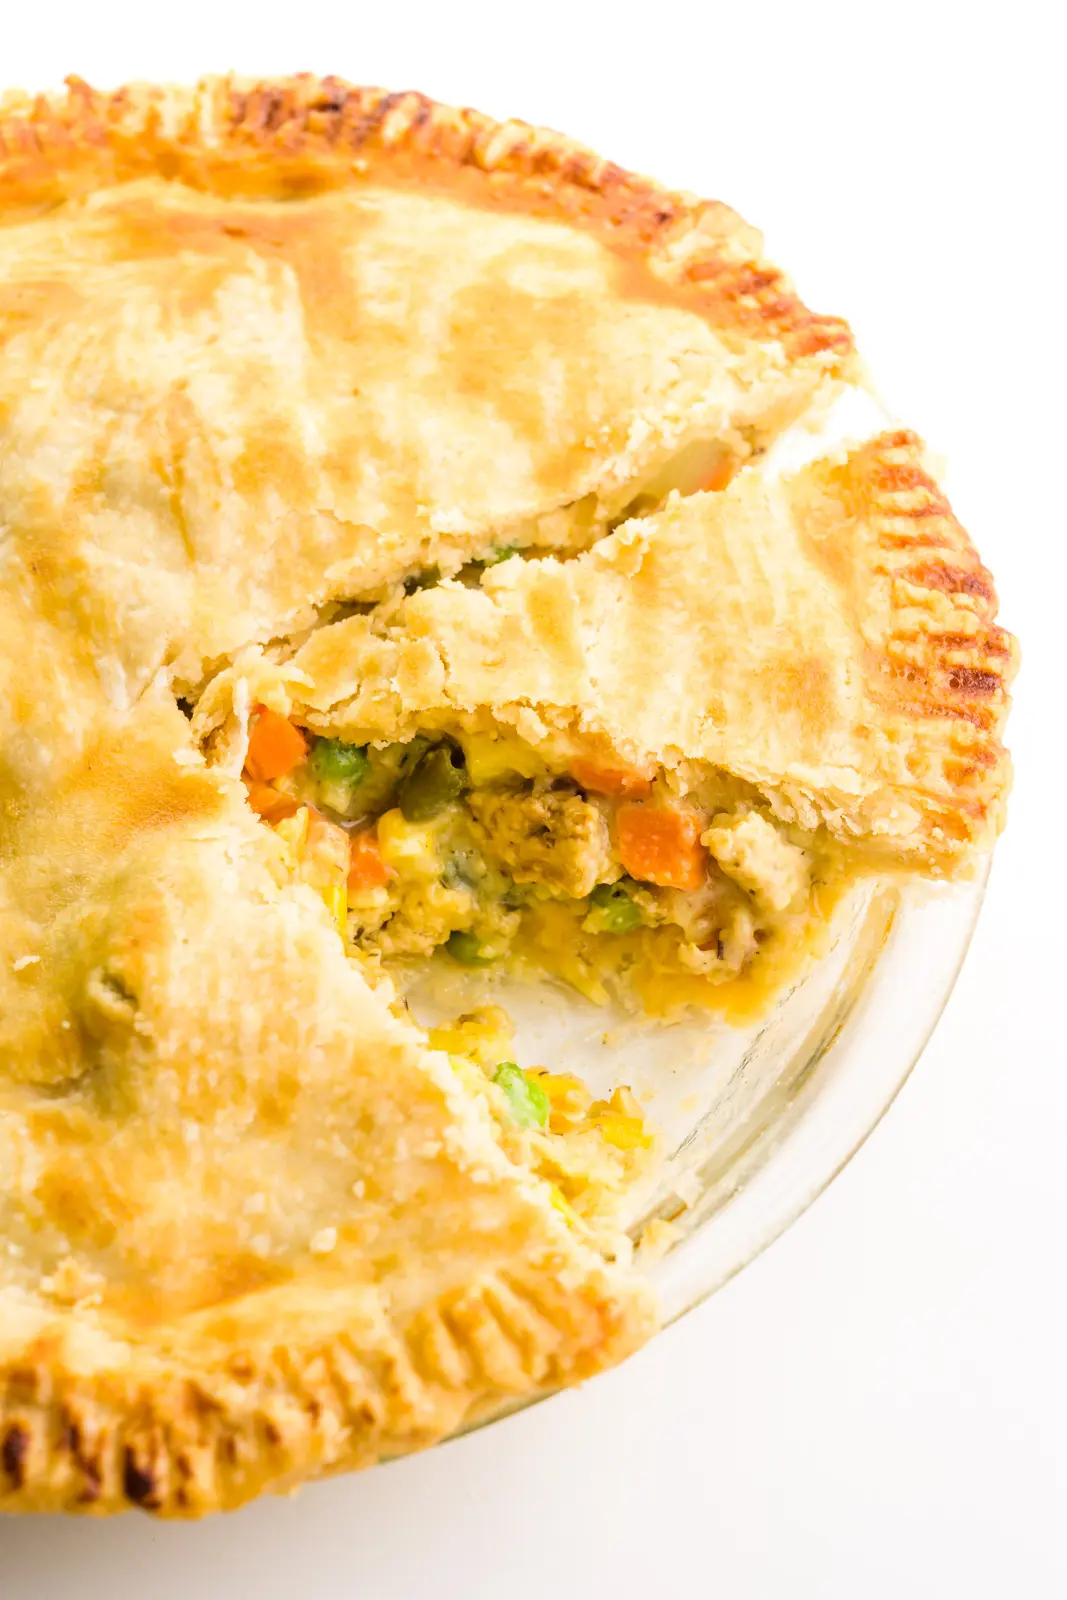 Looking down on a vegan pot pie with a slice cut out and another one cut and ready to be served.